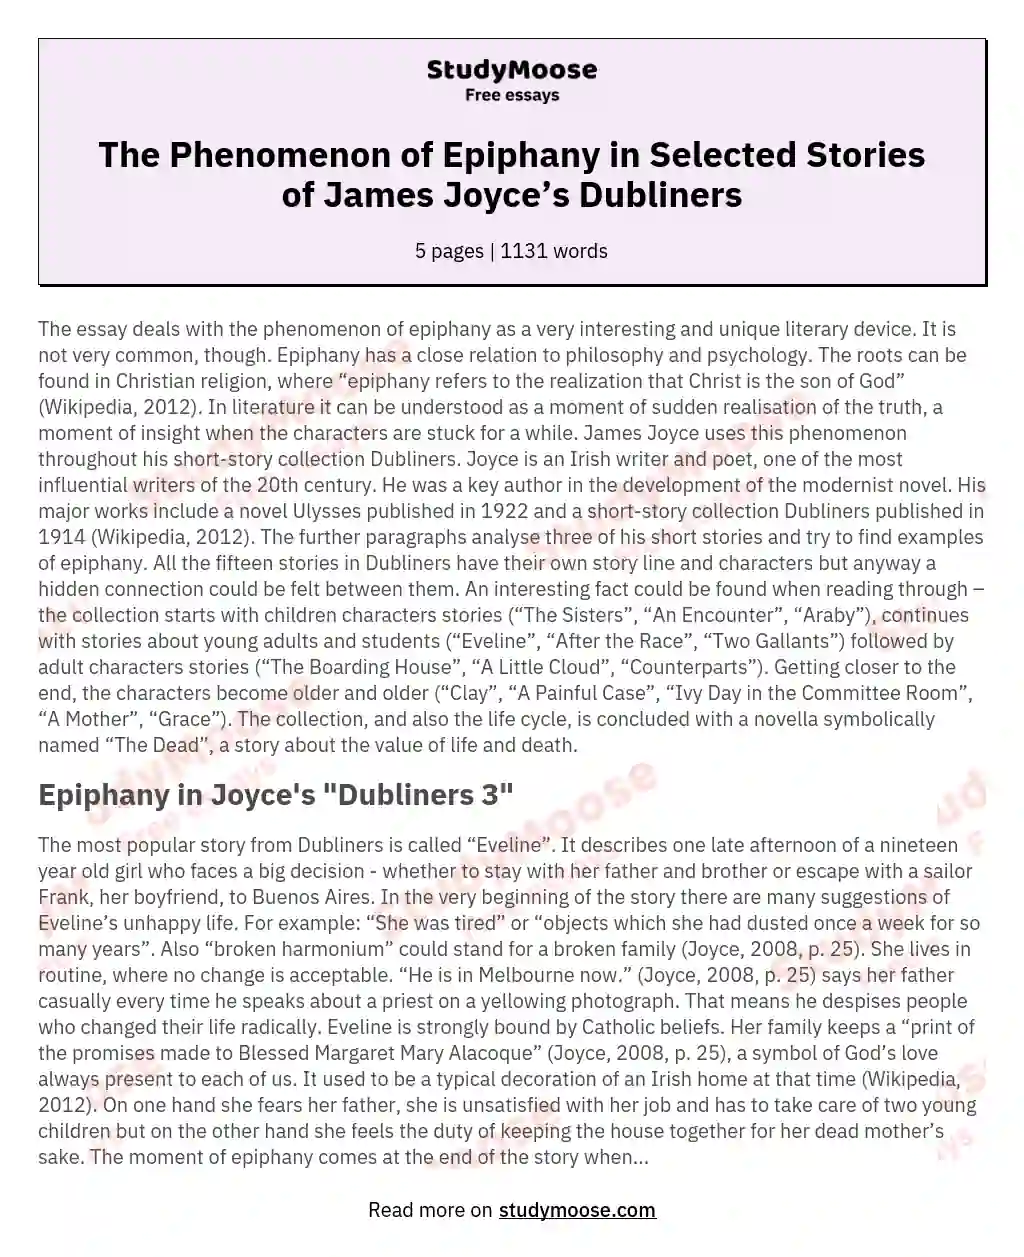 The Phenomenon of Epiphany in Selected Stories of James Joyce’s Dubliners essay